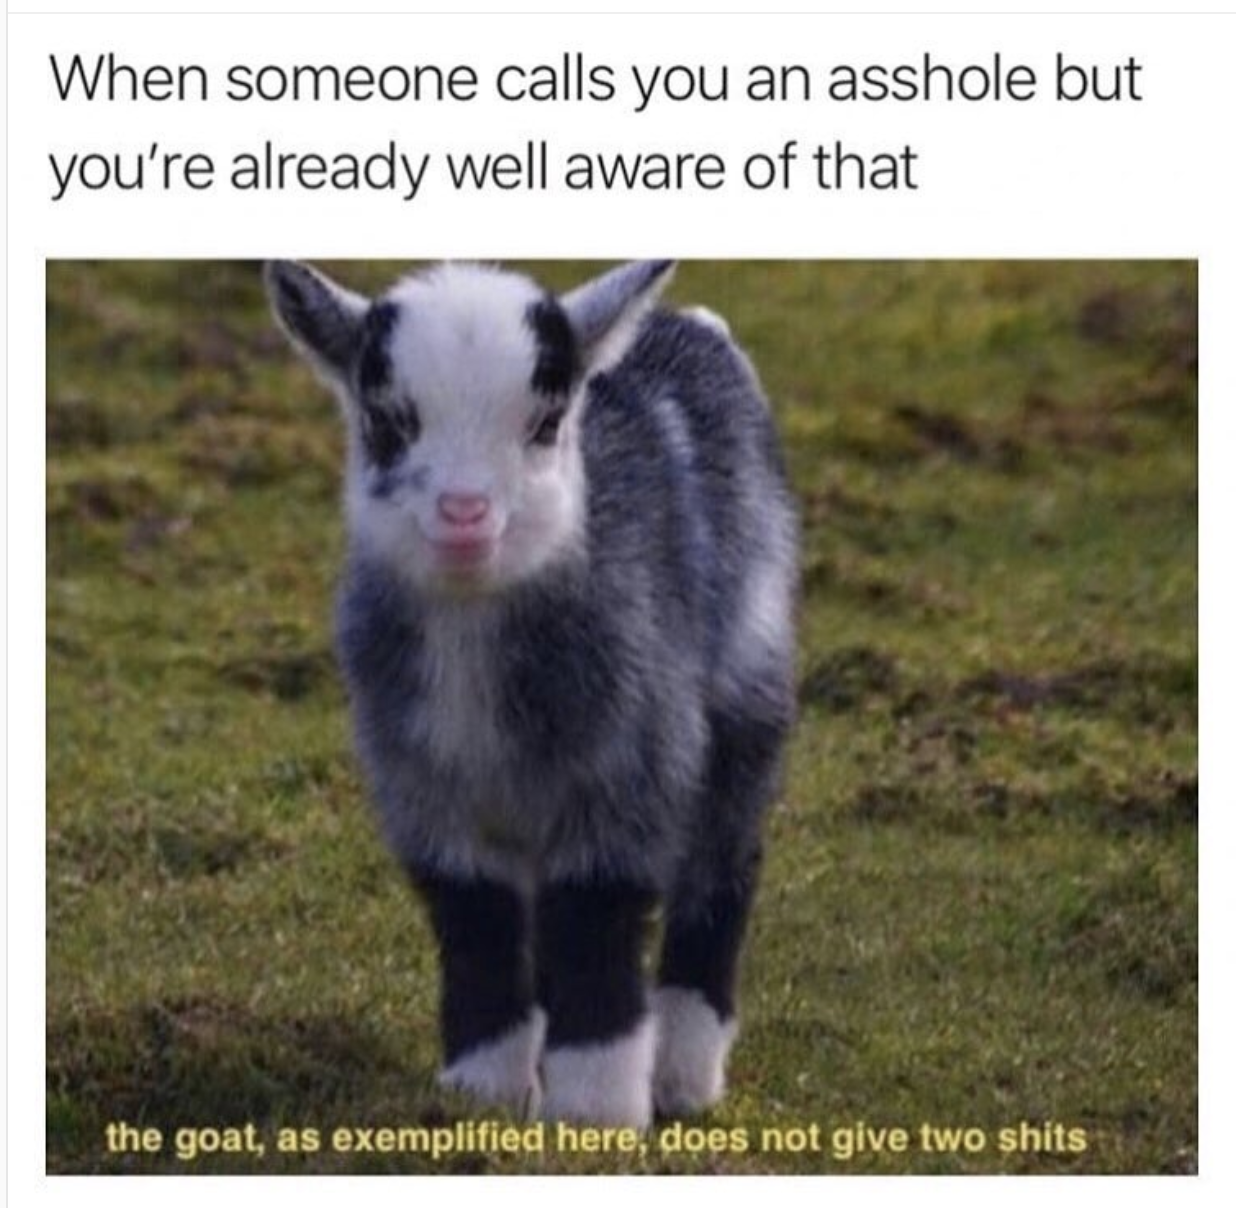 goat as exemplified here does not give two shits - When someone calls you an asshole but you're already well aware of that the goat, as exemplified here, does not give two shits